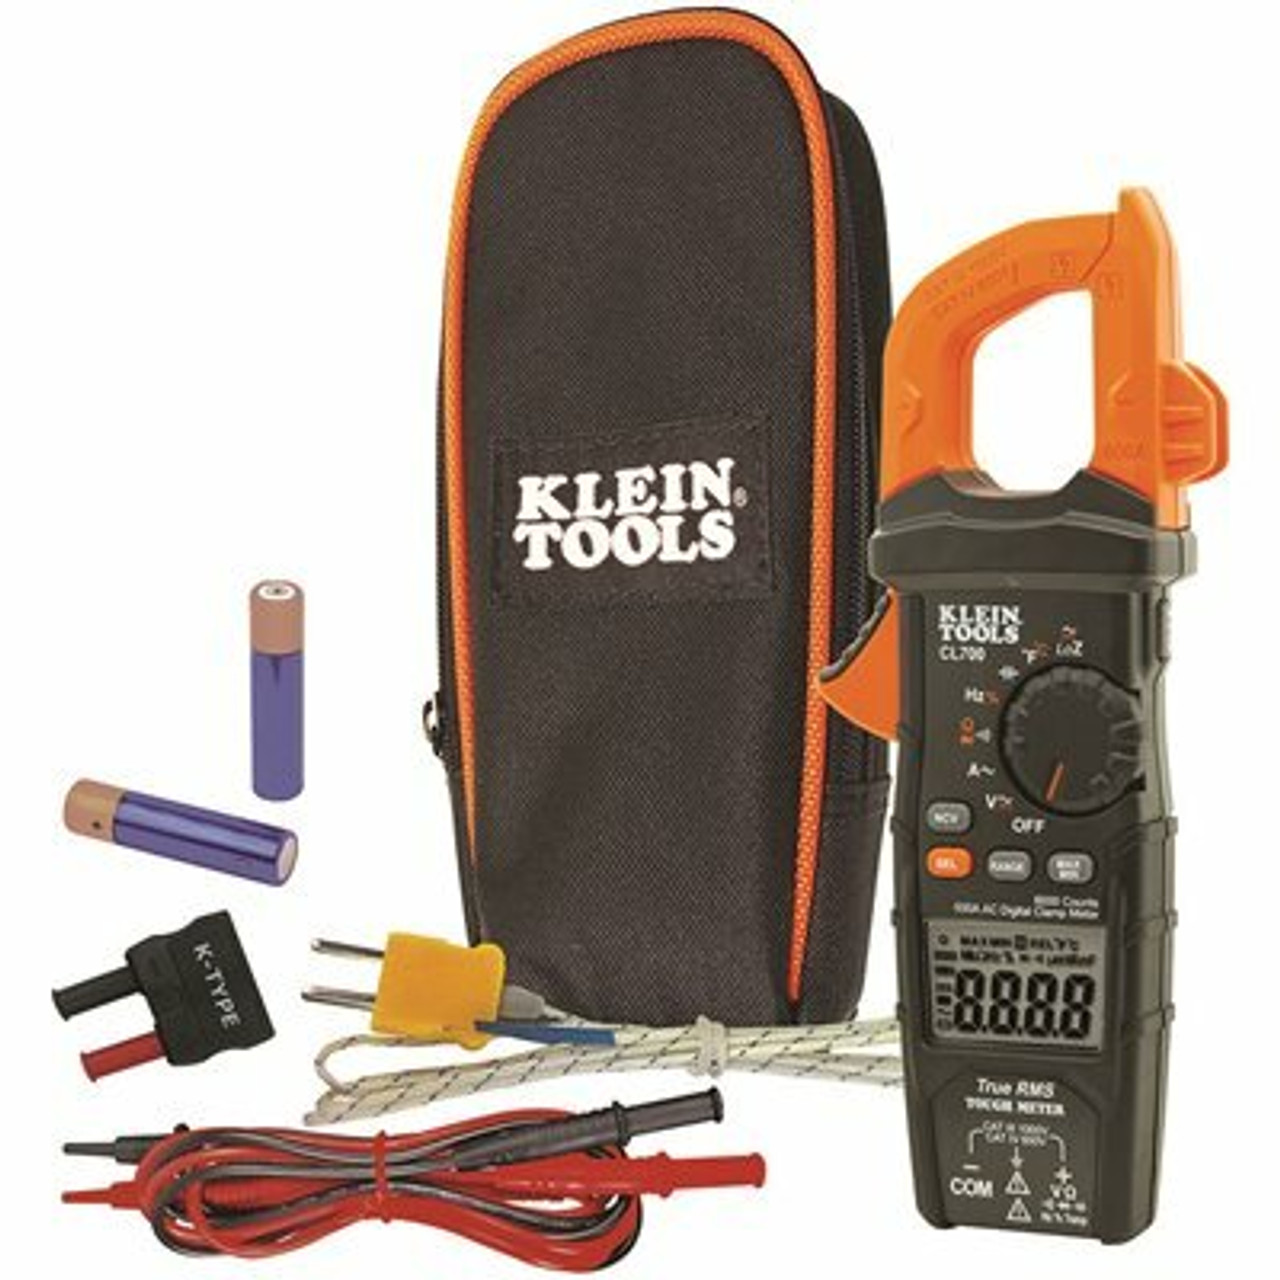 Klein Tools 600 Amp Ac True Rms Auto-Ranging Digital Clamp Meter With Temp